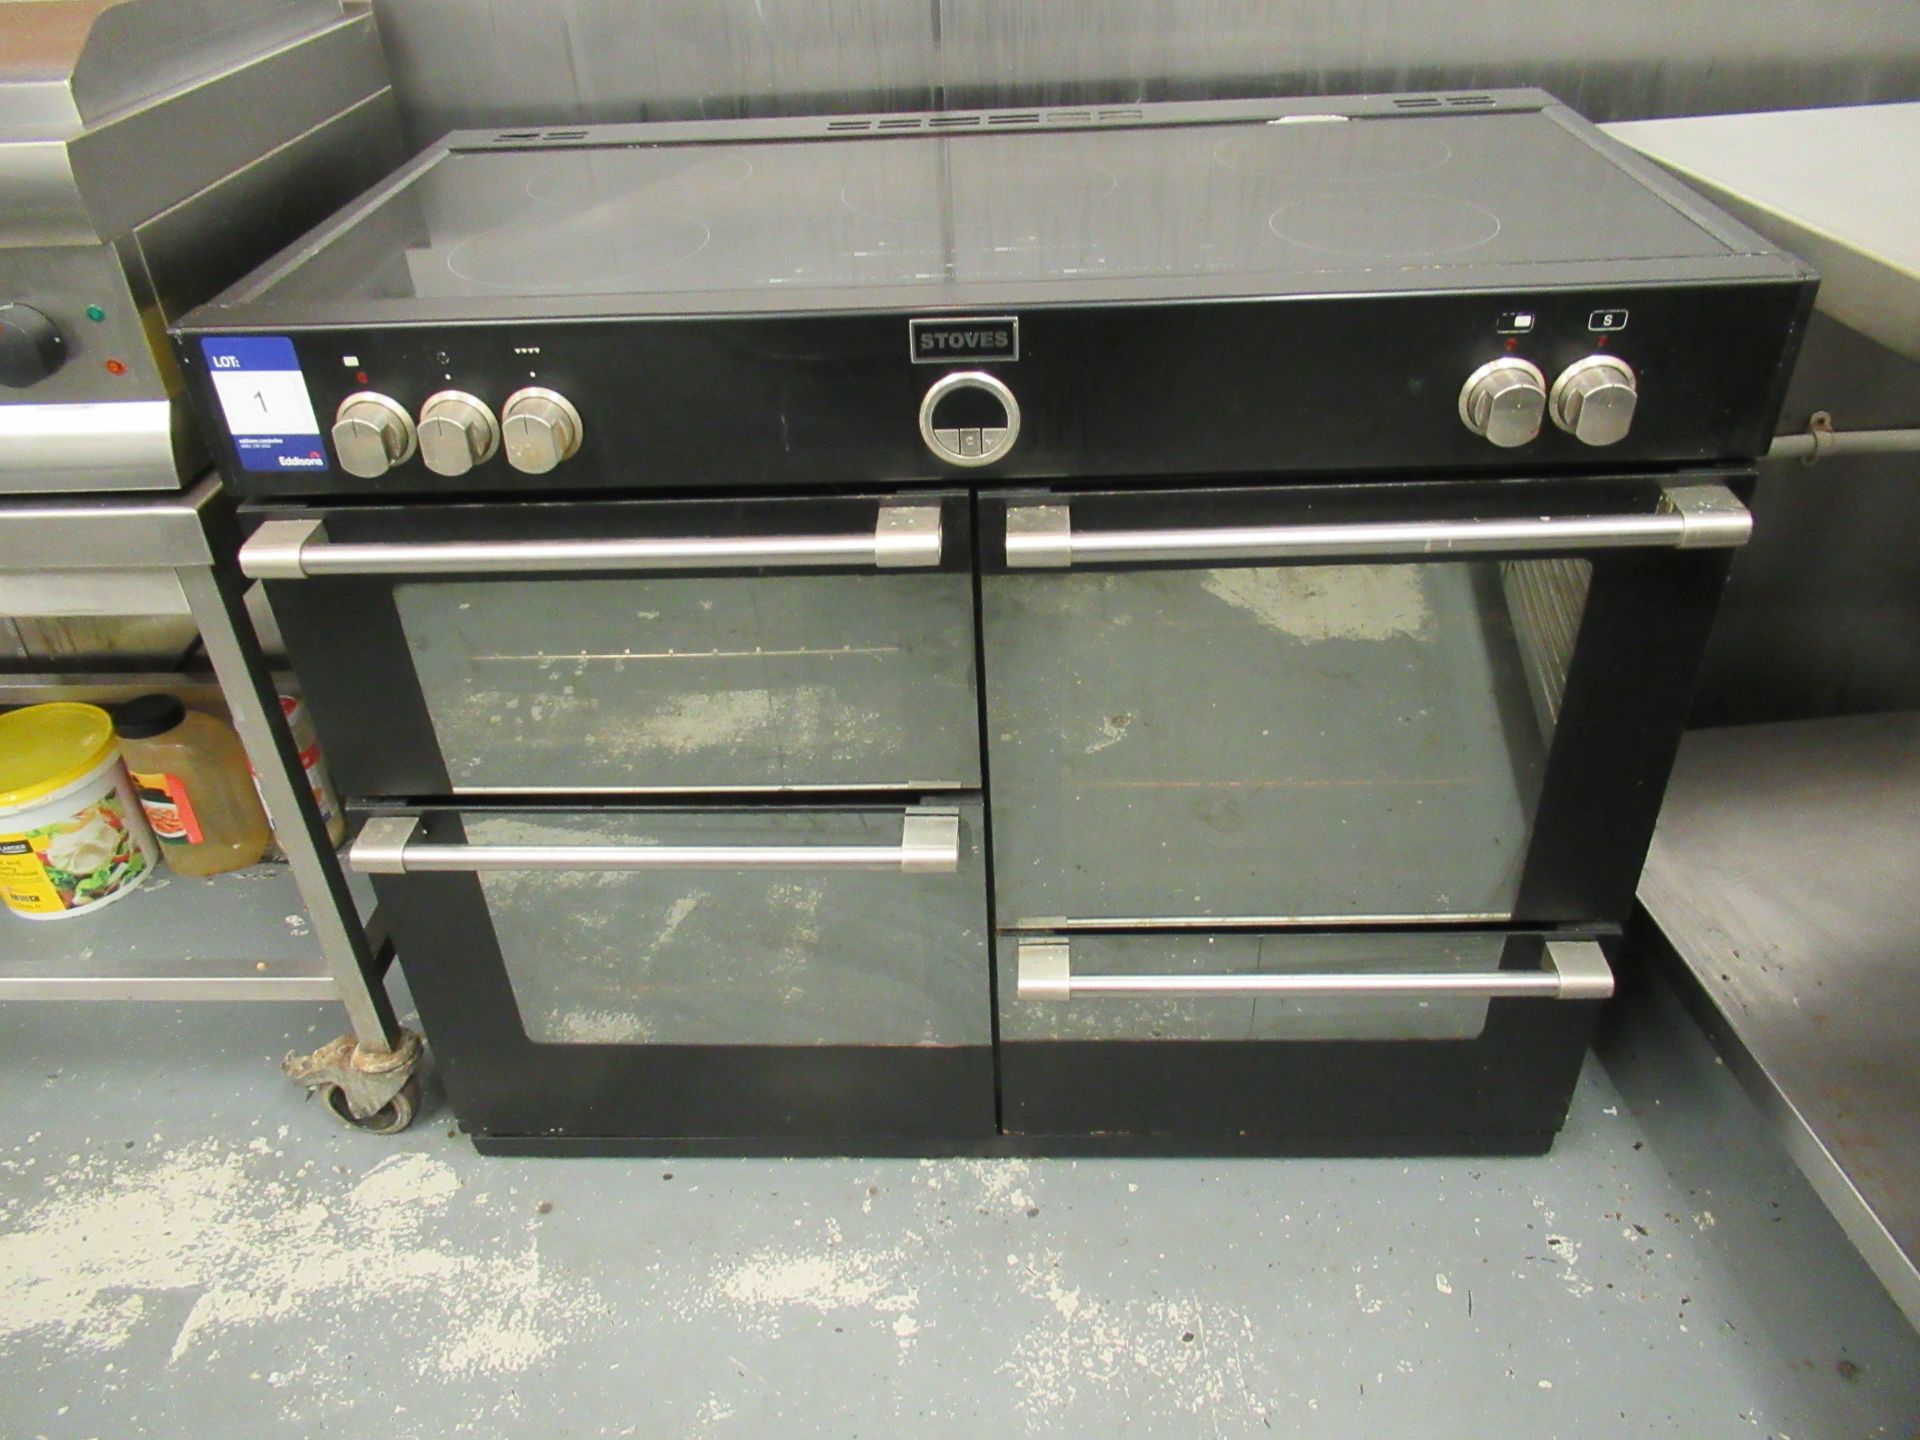 Stoves 5 Induction Ring Cooking Range with 4 Ovens